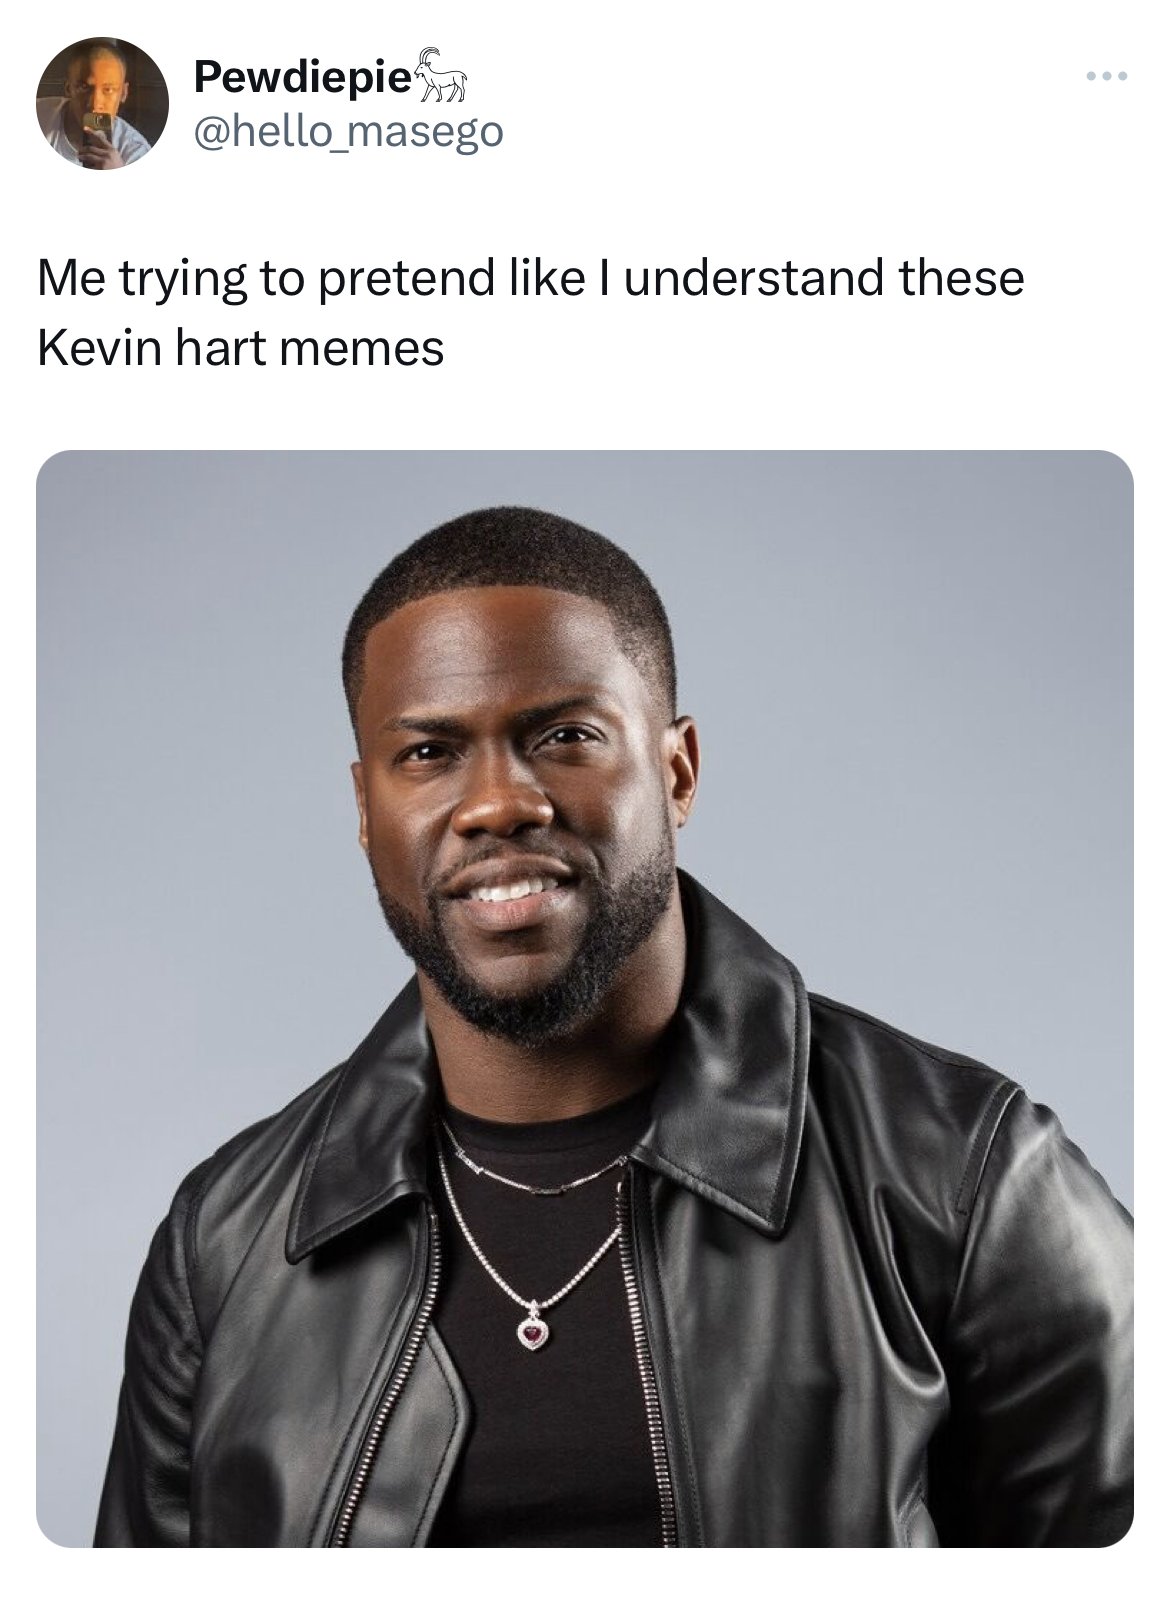 Kevin Hart Is Confused by All the Memes So the Internet Answered with